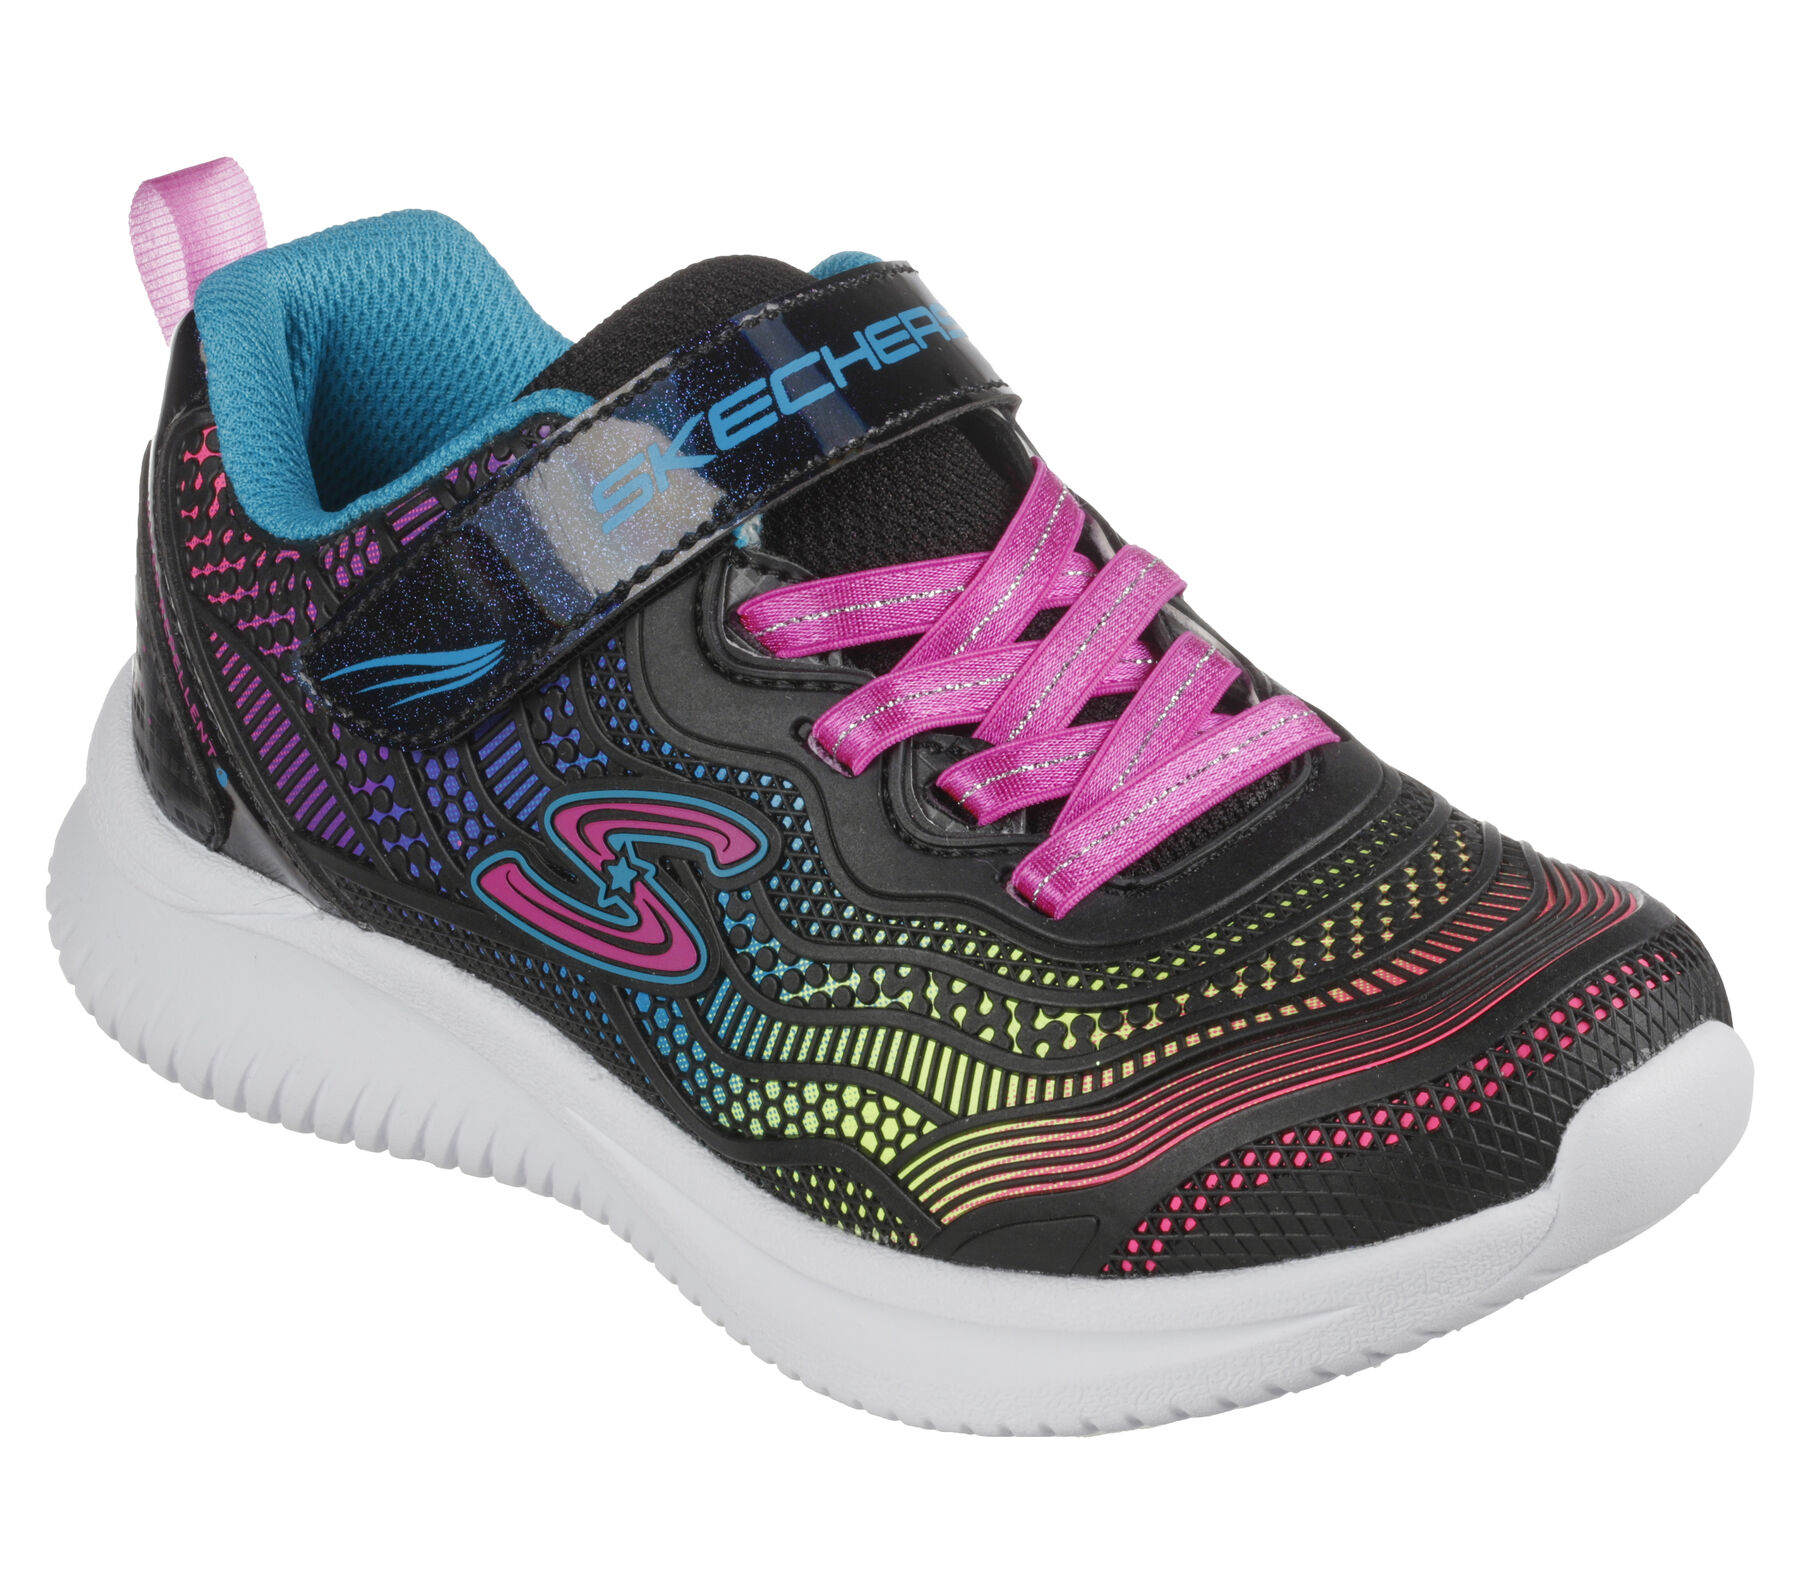 Shop the Jumpsters | SKECHERS